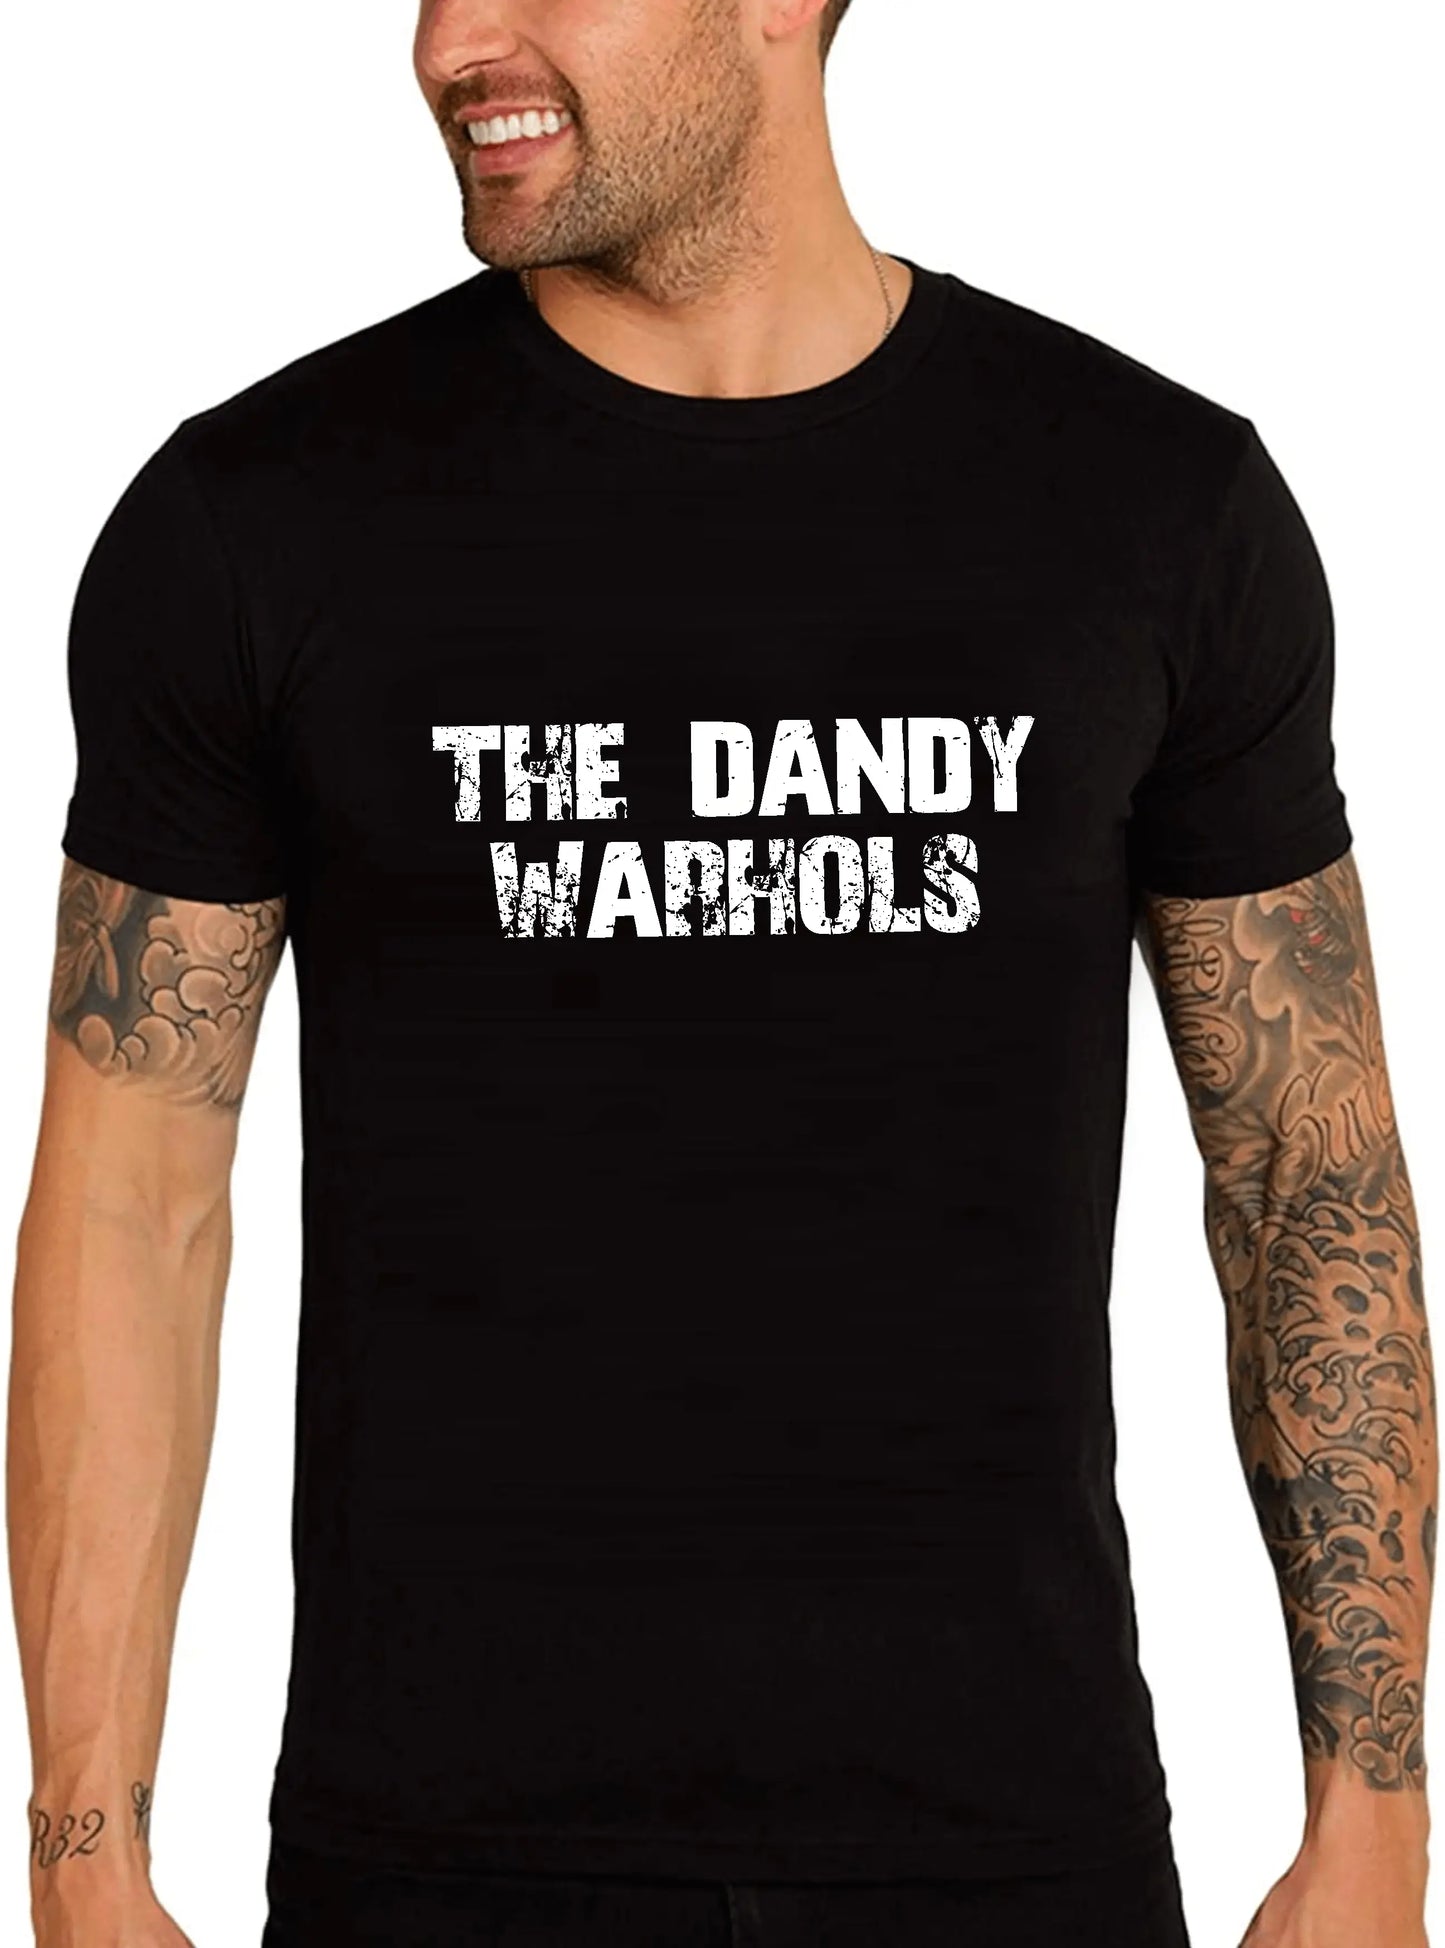 Men's Graphic T-Shirt The Dandy Warhols Eco-Friendly Limited Edition Short Sleeve Tee-Shirt Vintage Birthday Gift Novelty